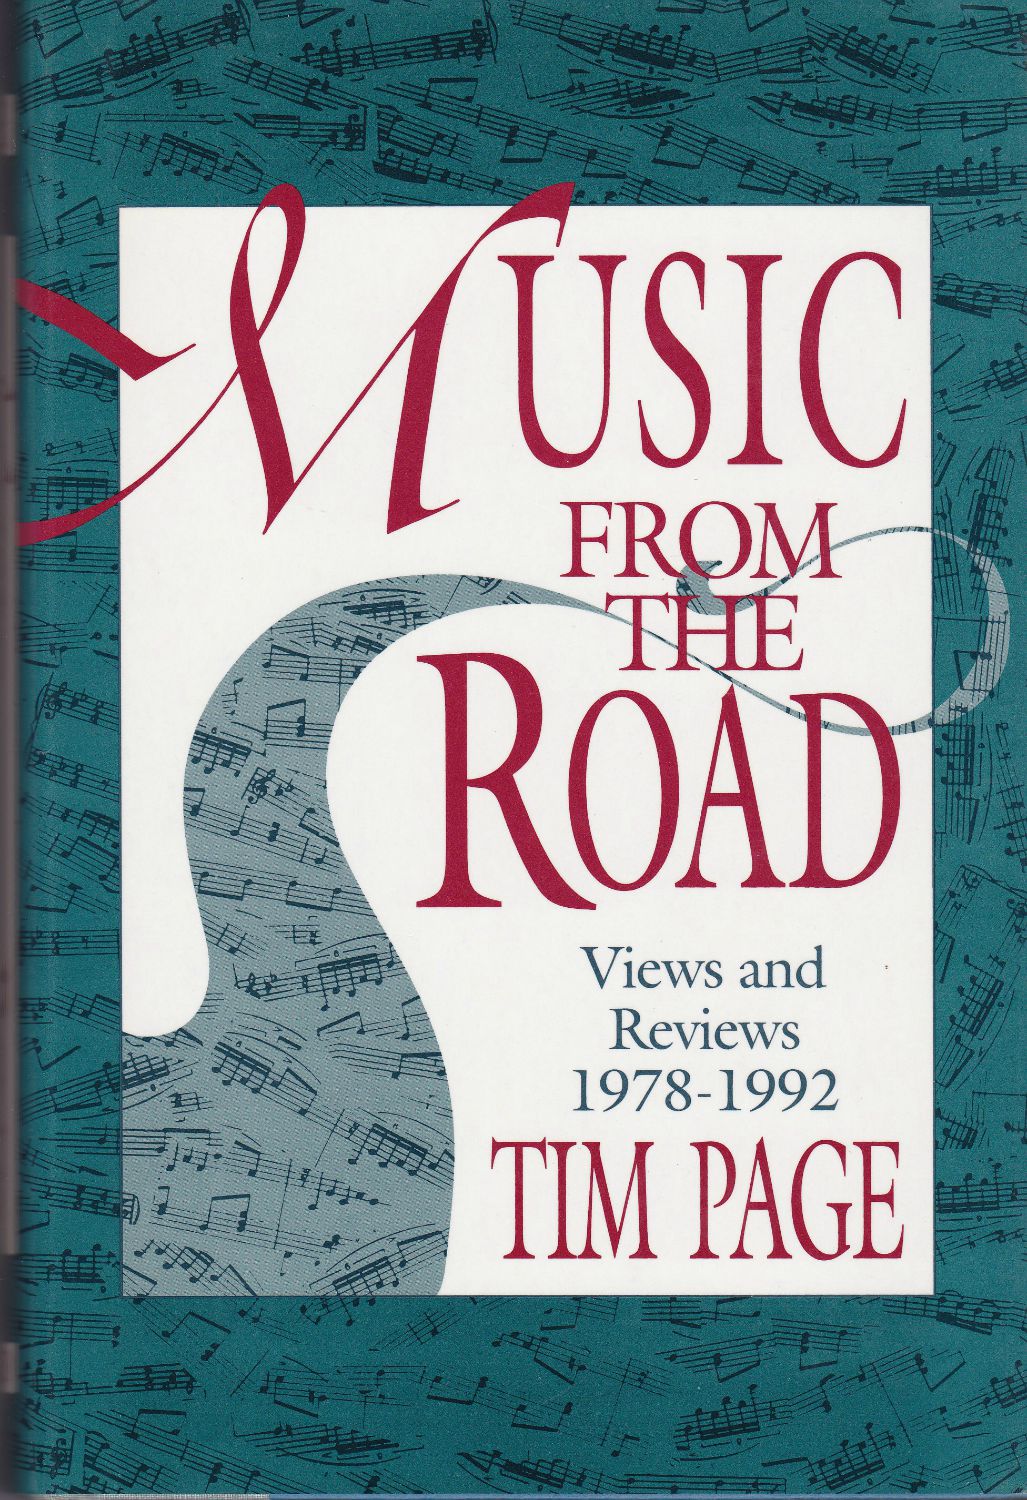 Music from the road : views and reviews, 1978-1992